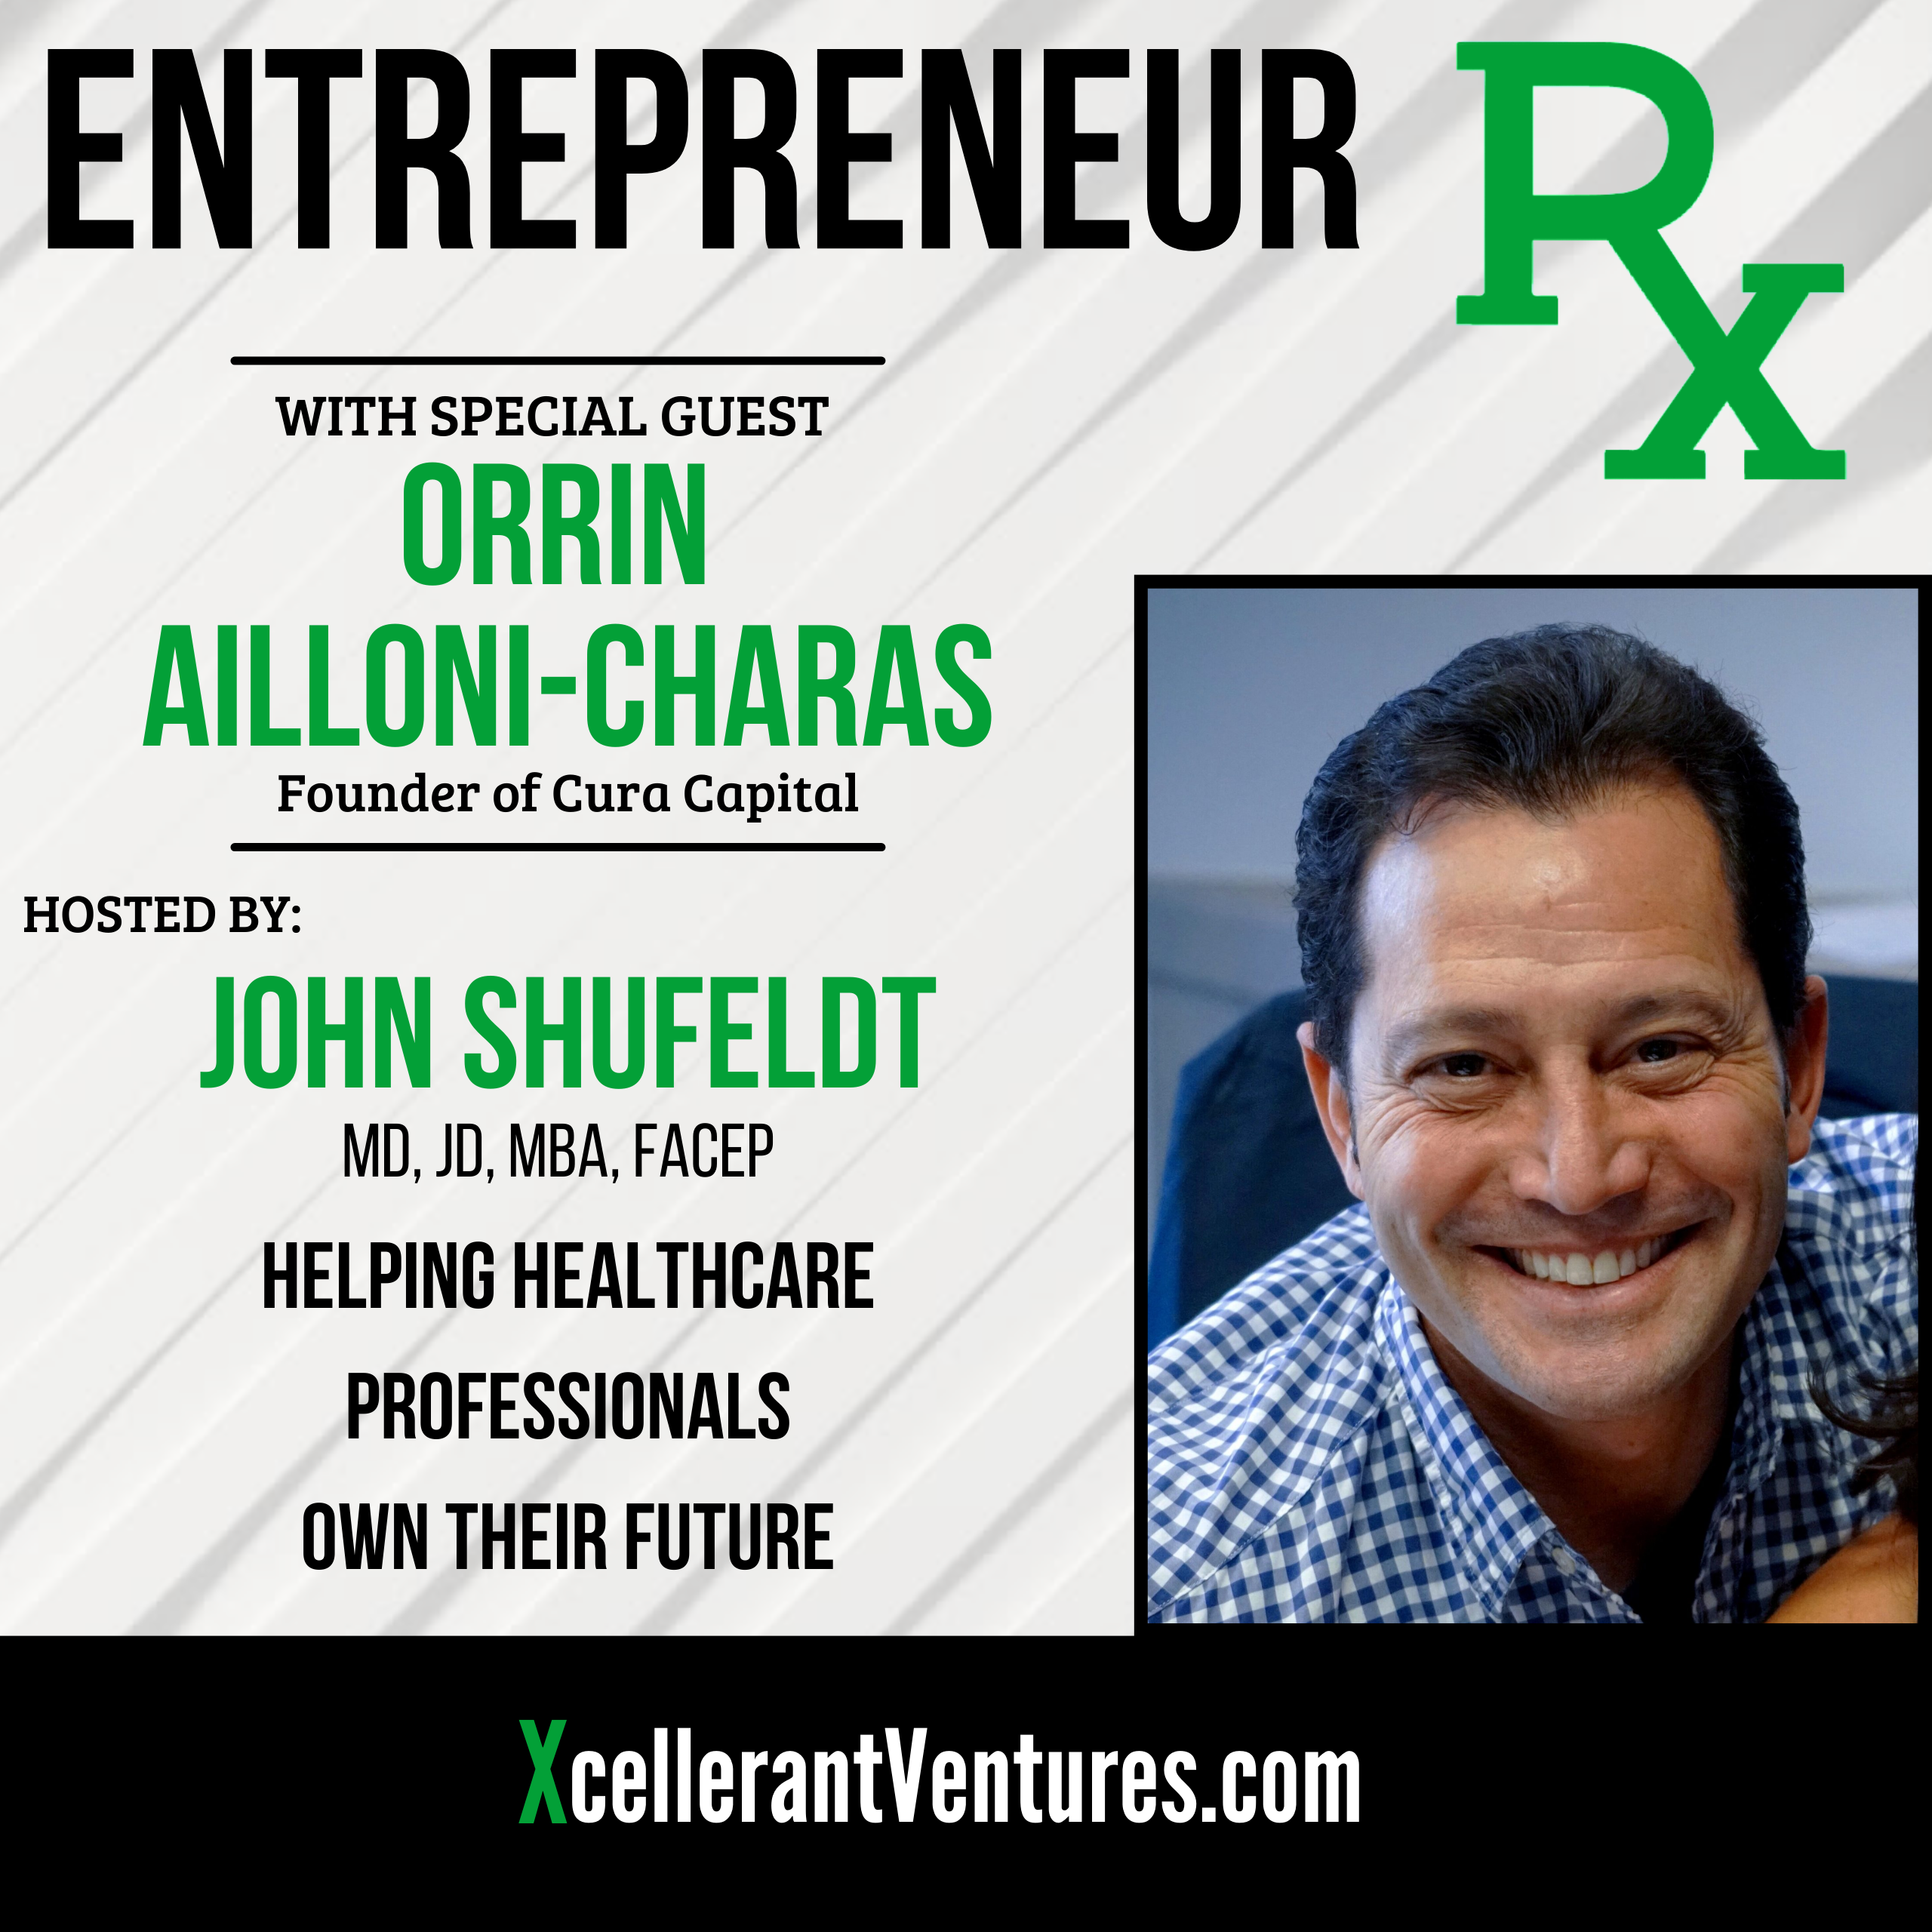 RX54: Orrin Ailloni-Charas, MD, MBA, Founder & Managing Partner of Cura Capital